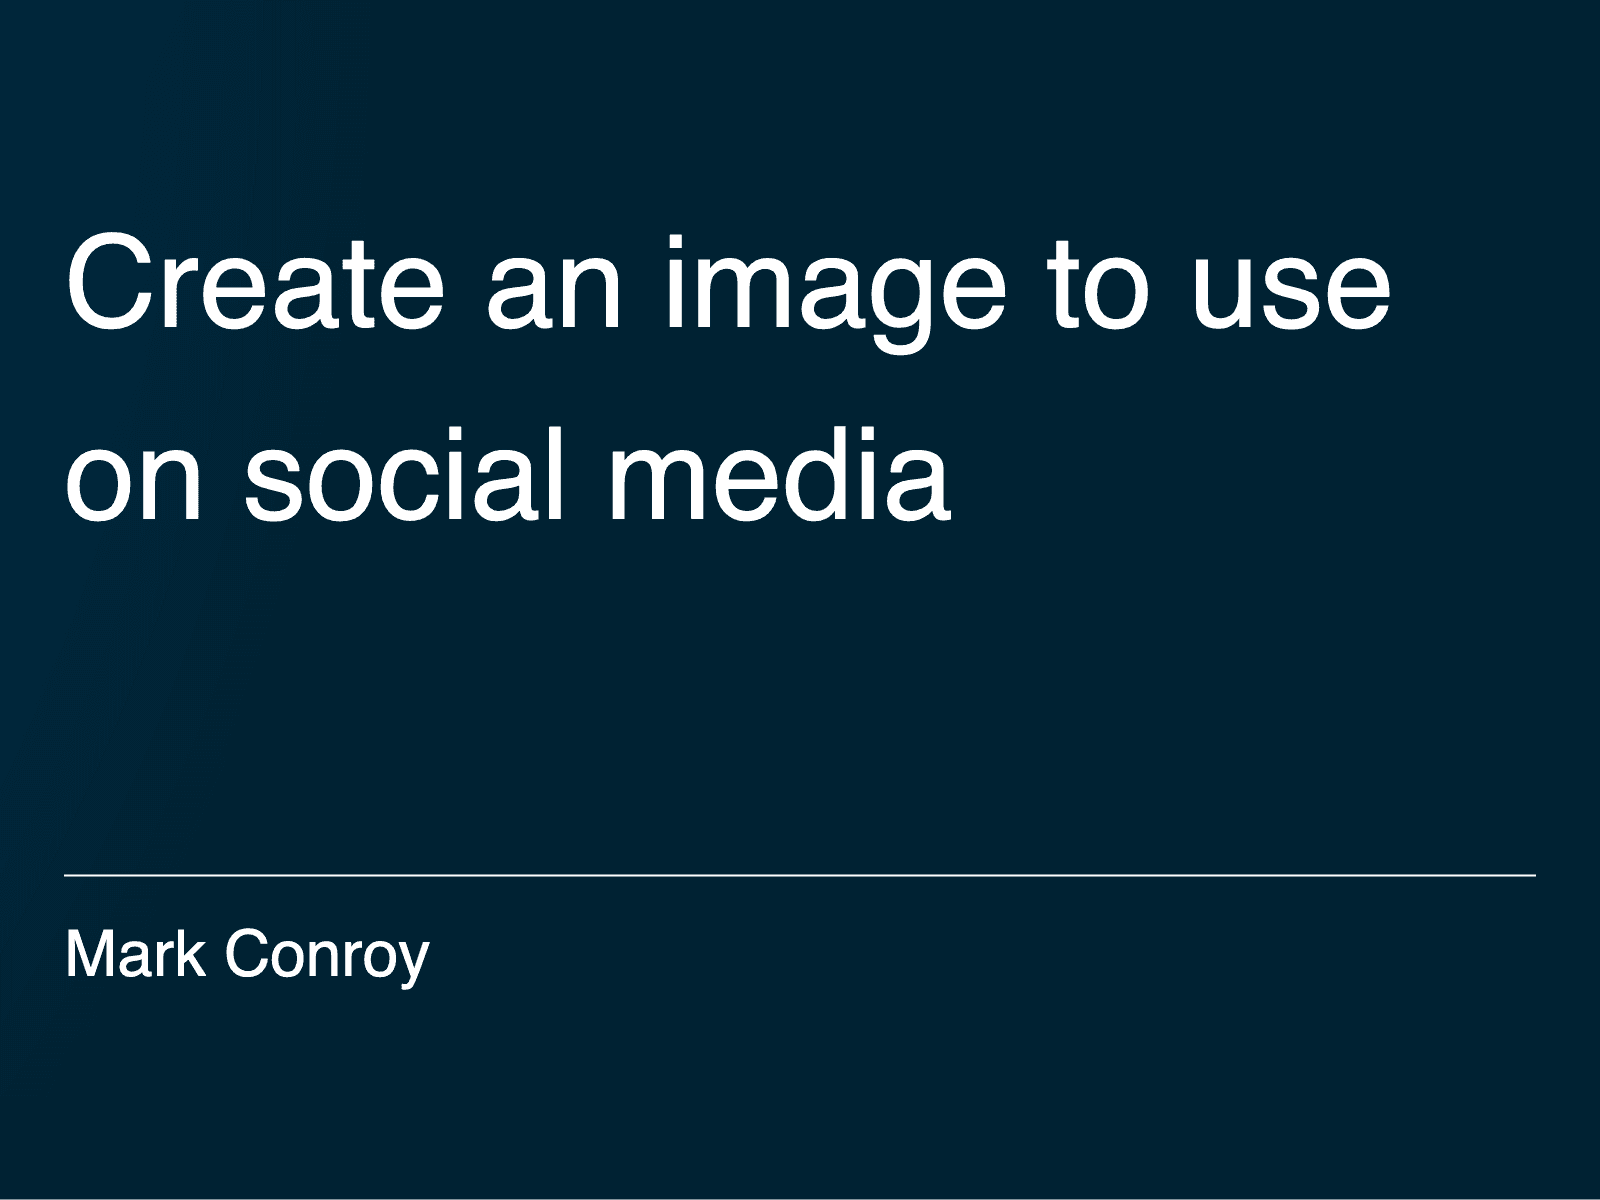 Create an image to use on social media